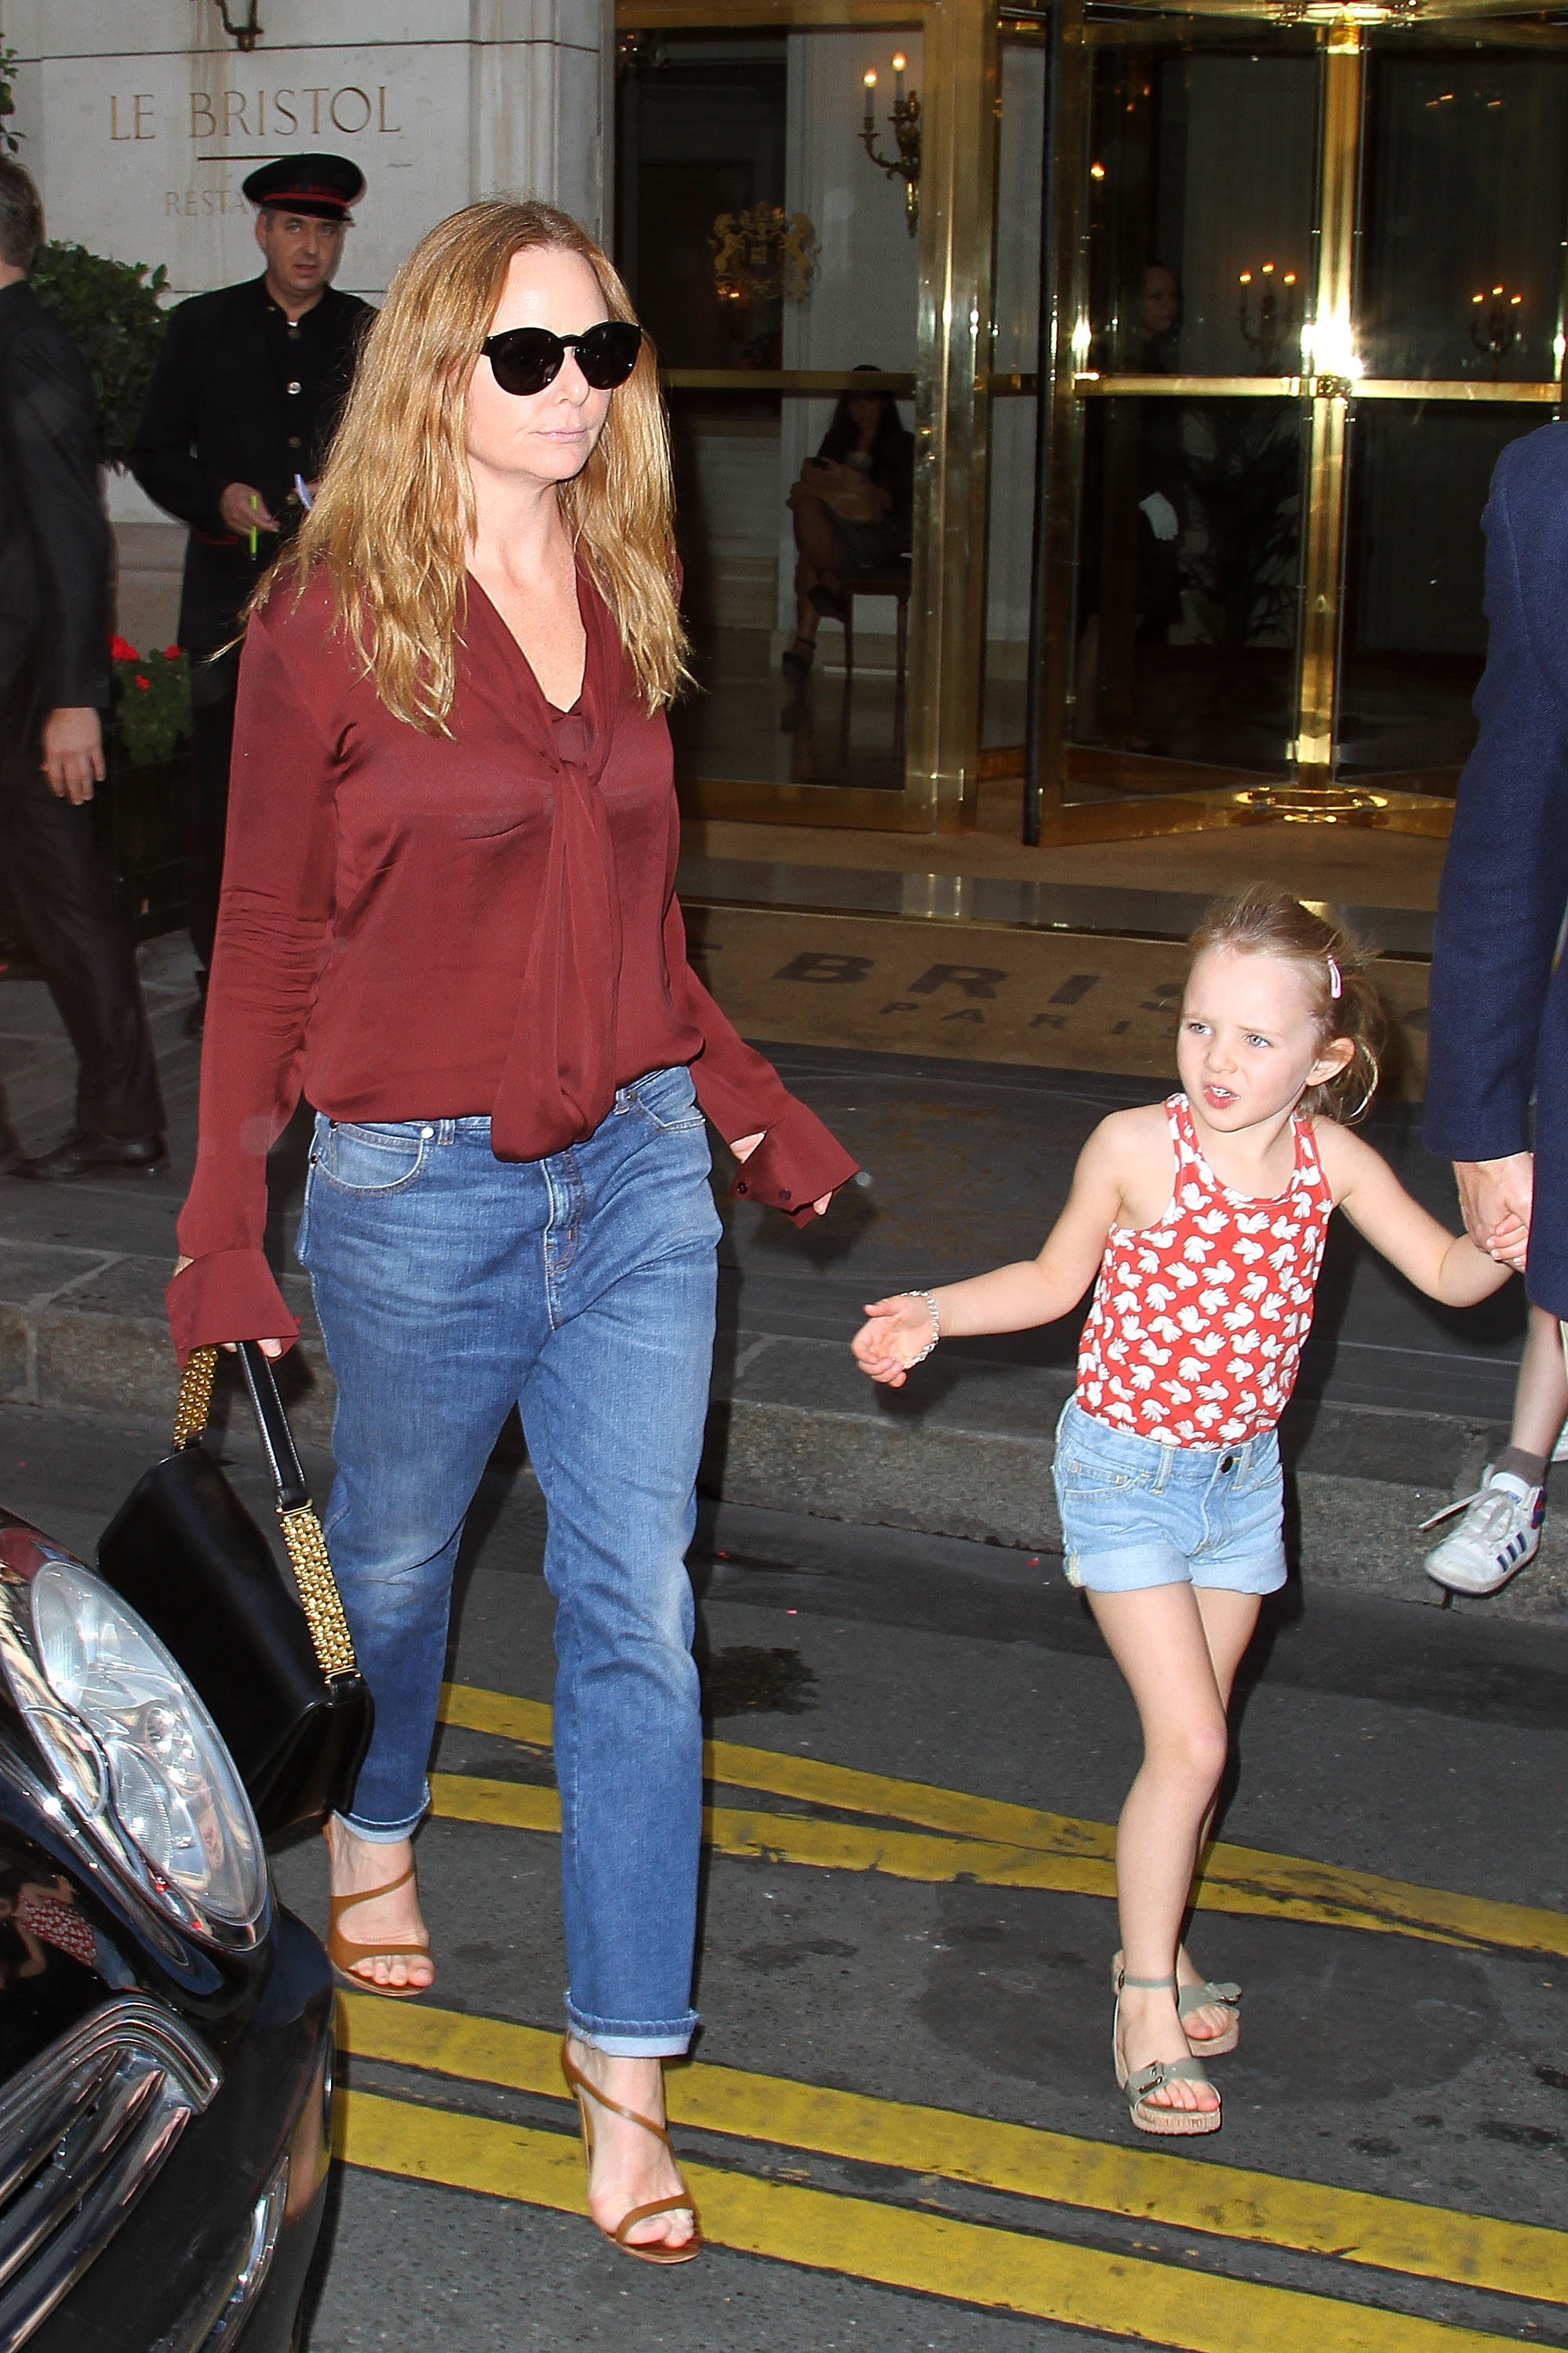 Stella McCartney and her daughter Bailey Linda Olwyn Willis are spotted at the 'Le Bristol' hotel in Paris, France, on October 3, 2011. | Source: Getty Images